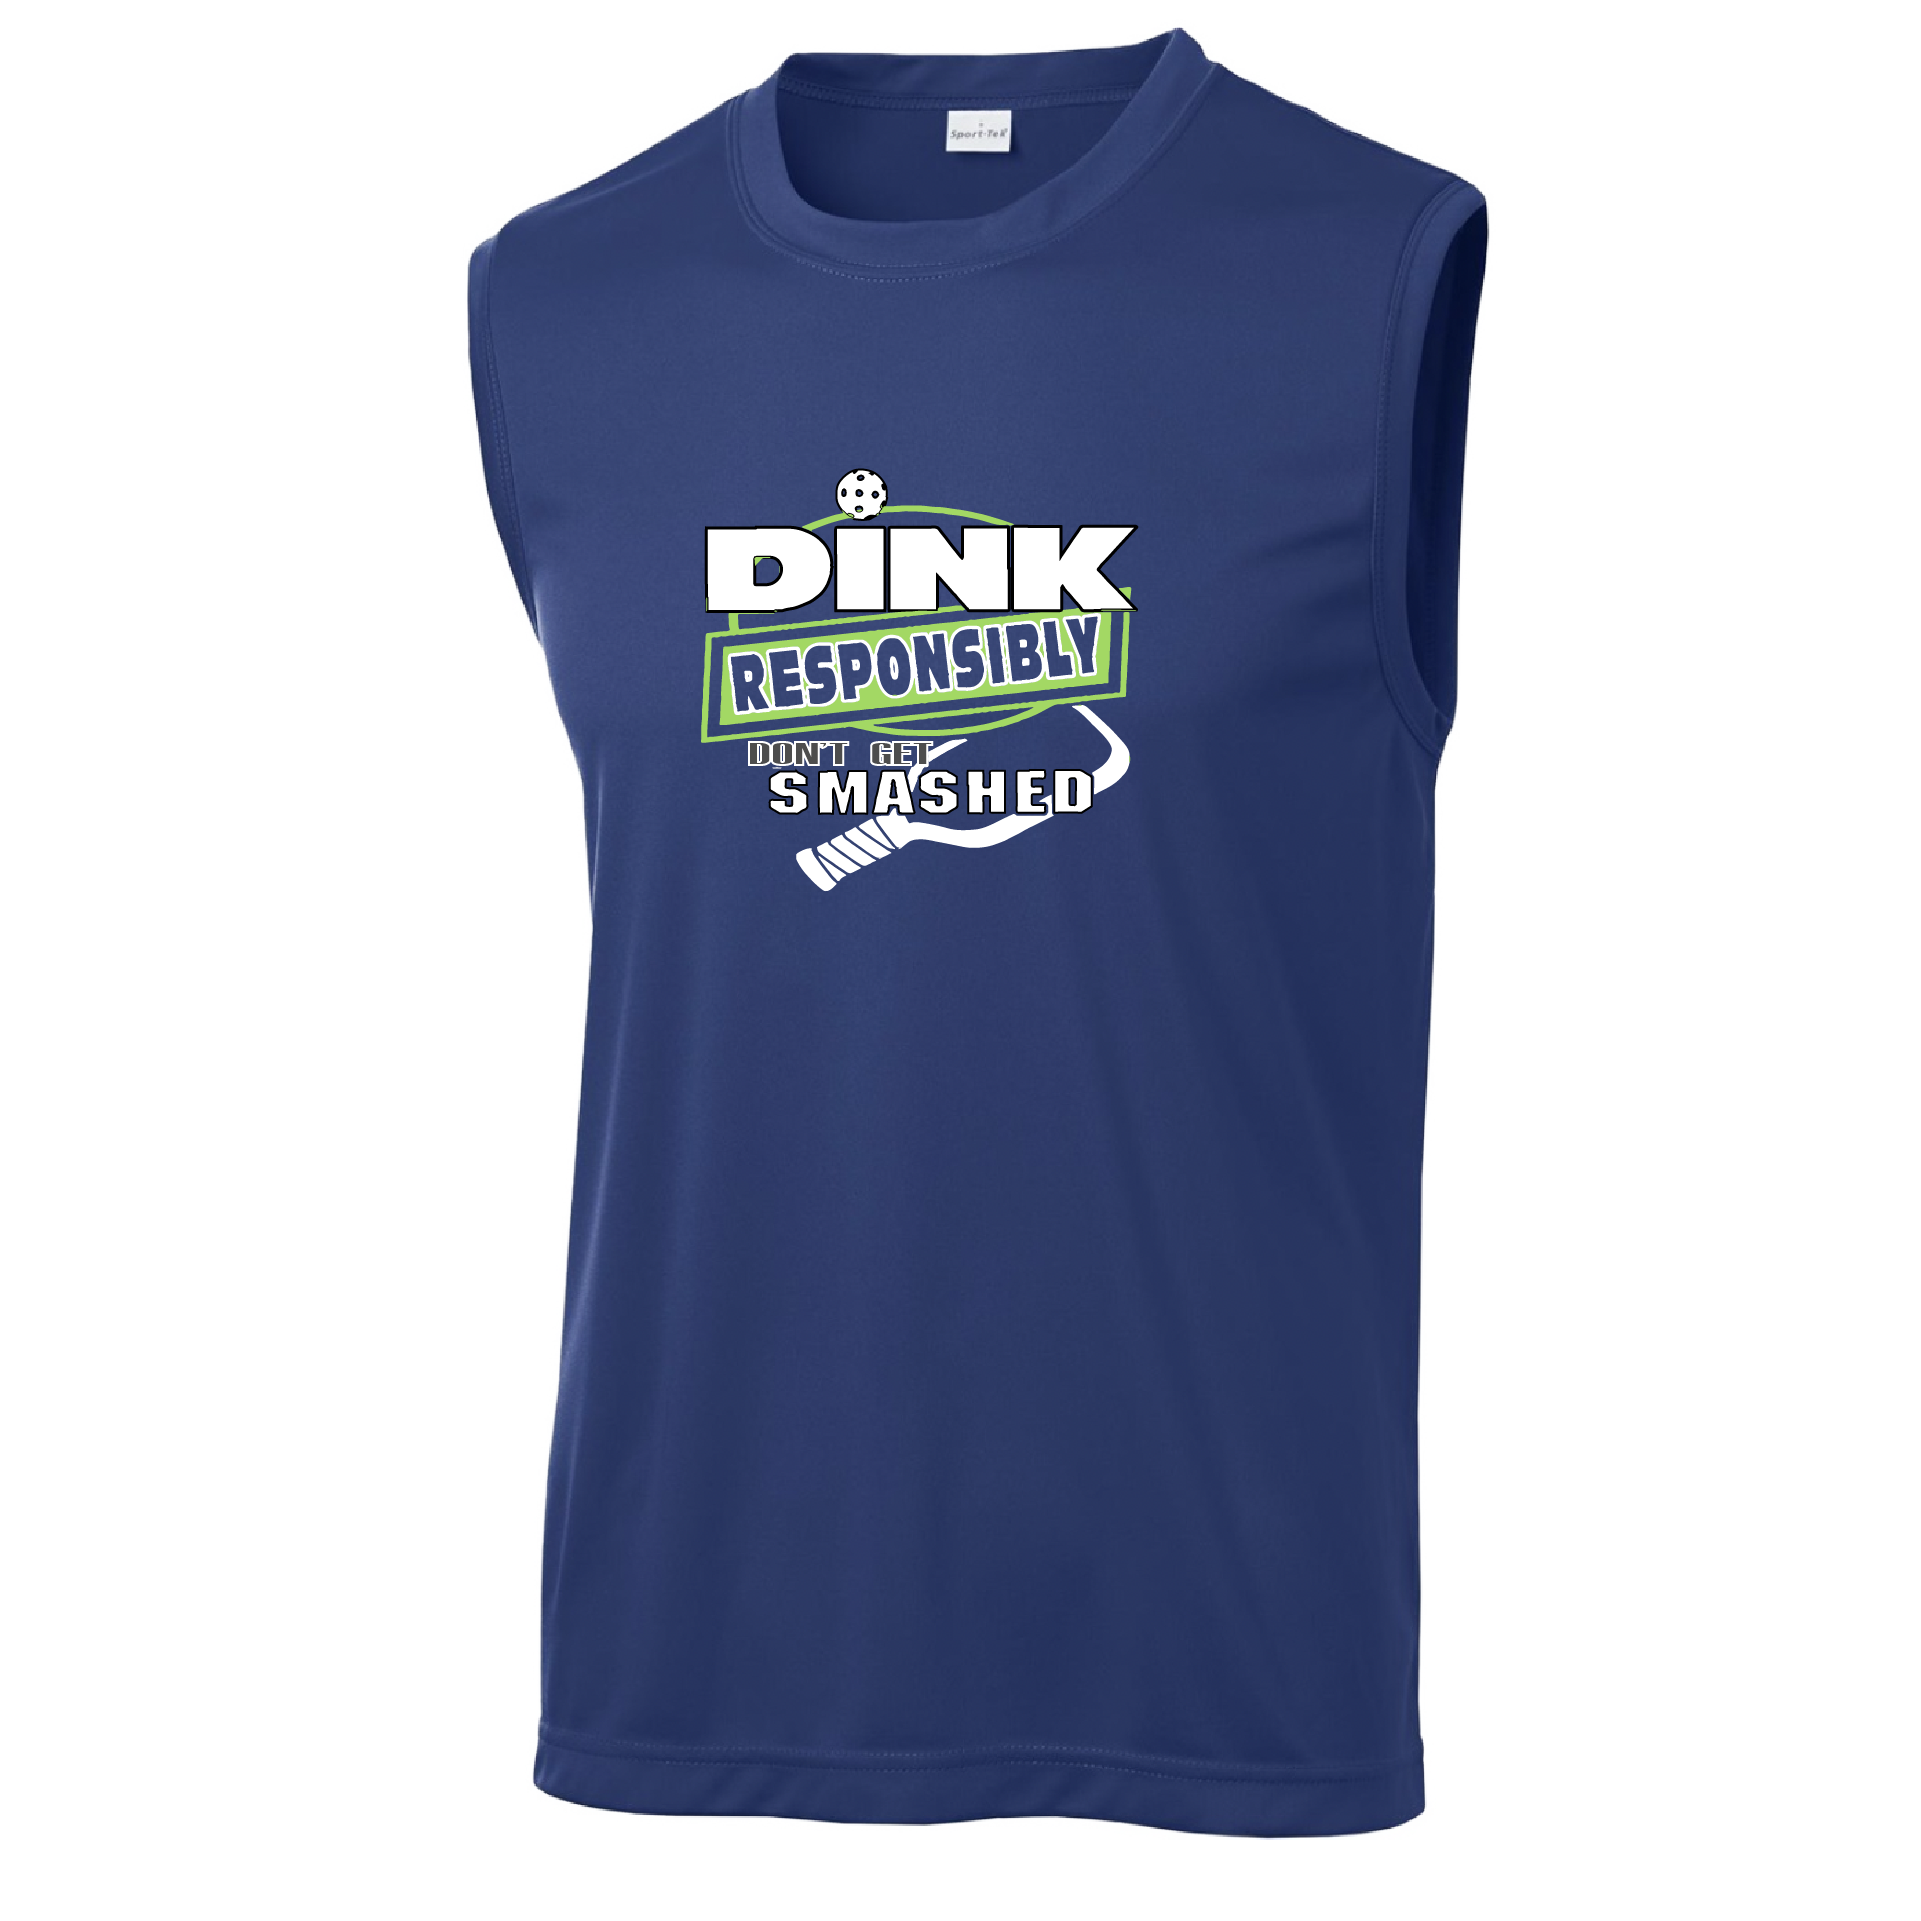 Pickleball Design: Dink Responsibly - Don't Get Smashed  Men's Styles: Sleeveless  Shirts are lightweight, roomy and highly breathable. These moisture-wicking shirts are designed for athletic performance. They feature PosiCharge technology to lock in color and prevent logos from fading. Removable tag and set-in sleeves for comfort.